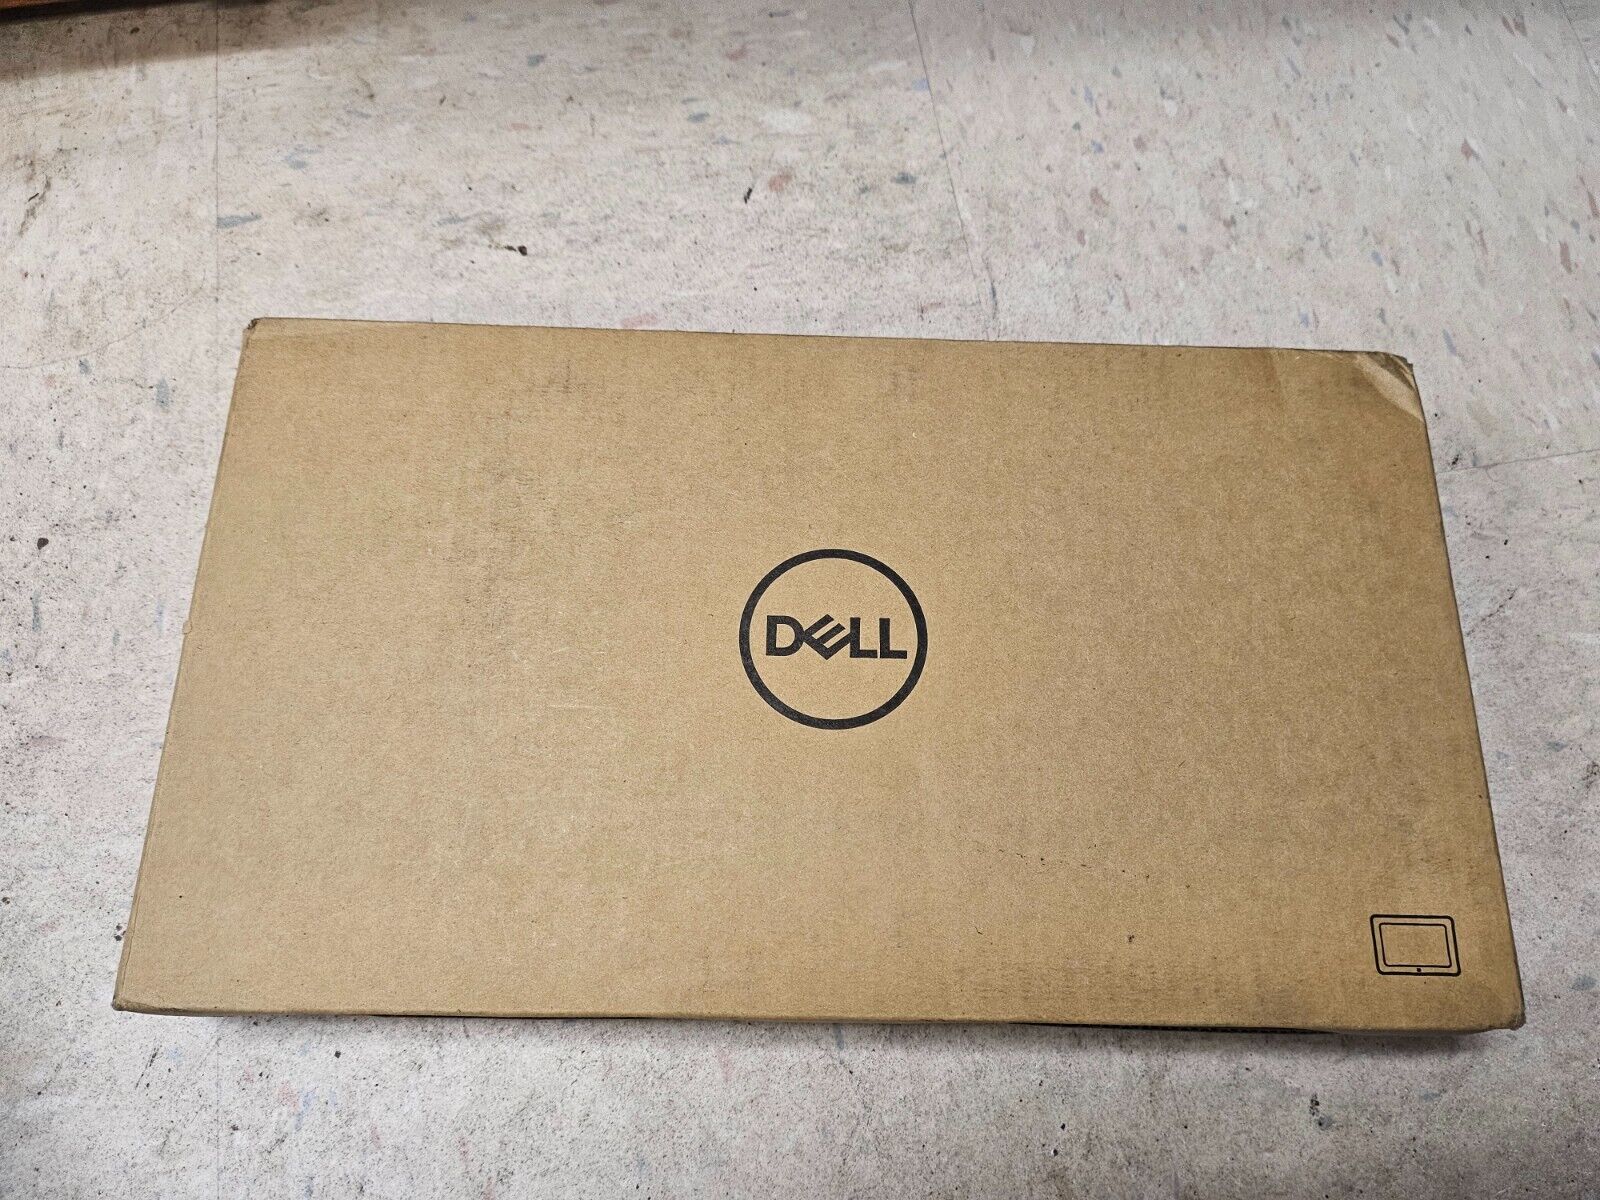 new in Box Dell Latitude 7220 rugged extreme tablet with new keyboard